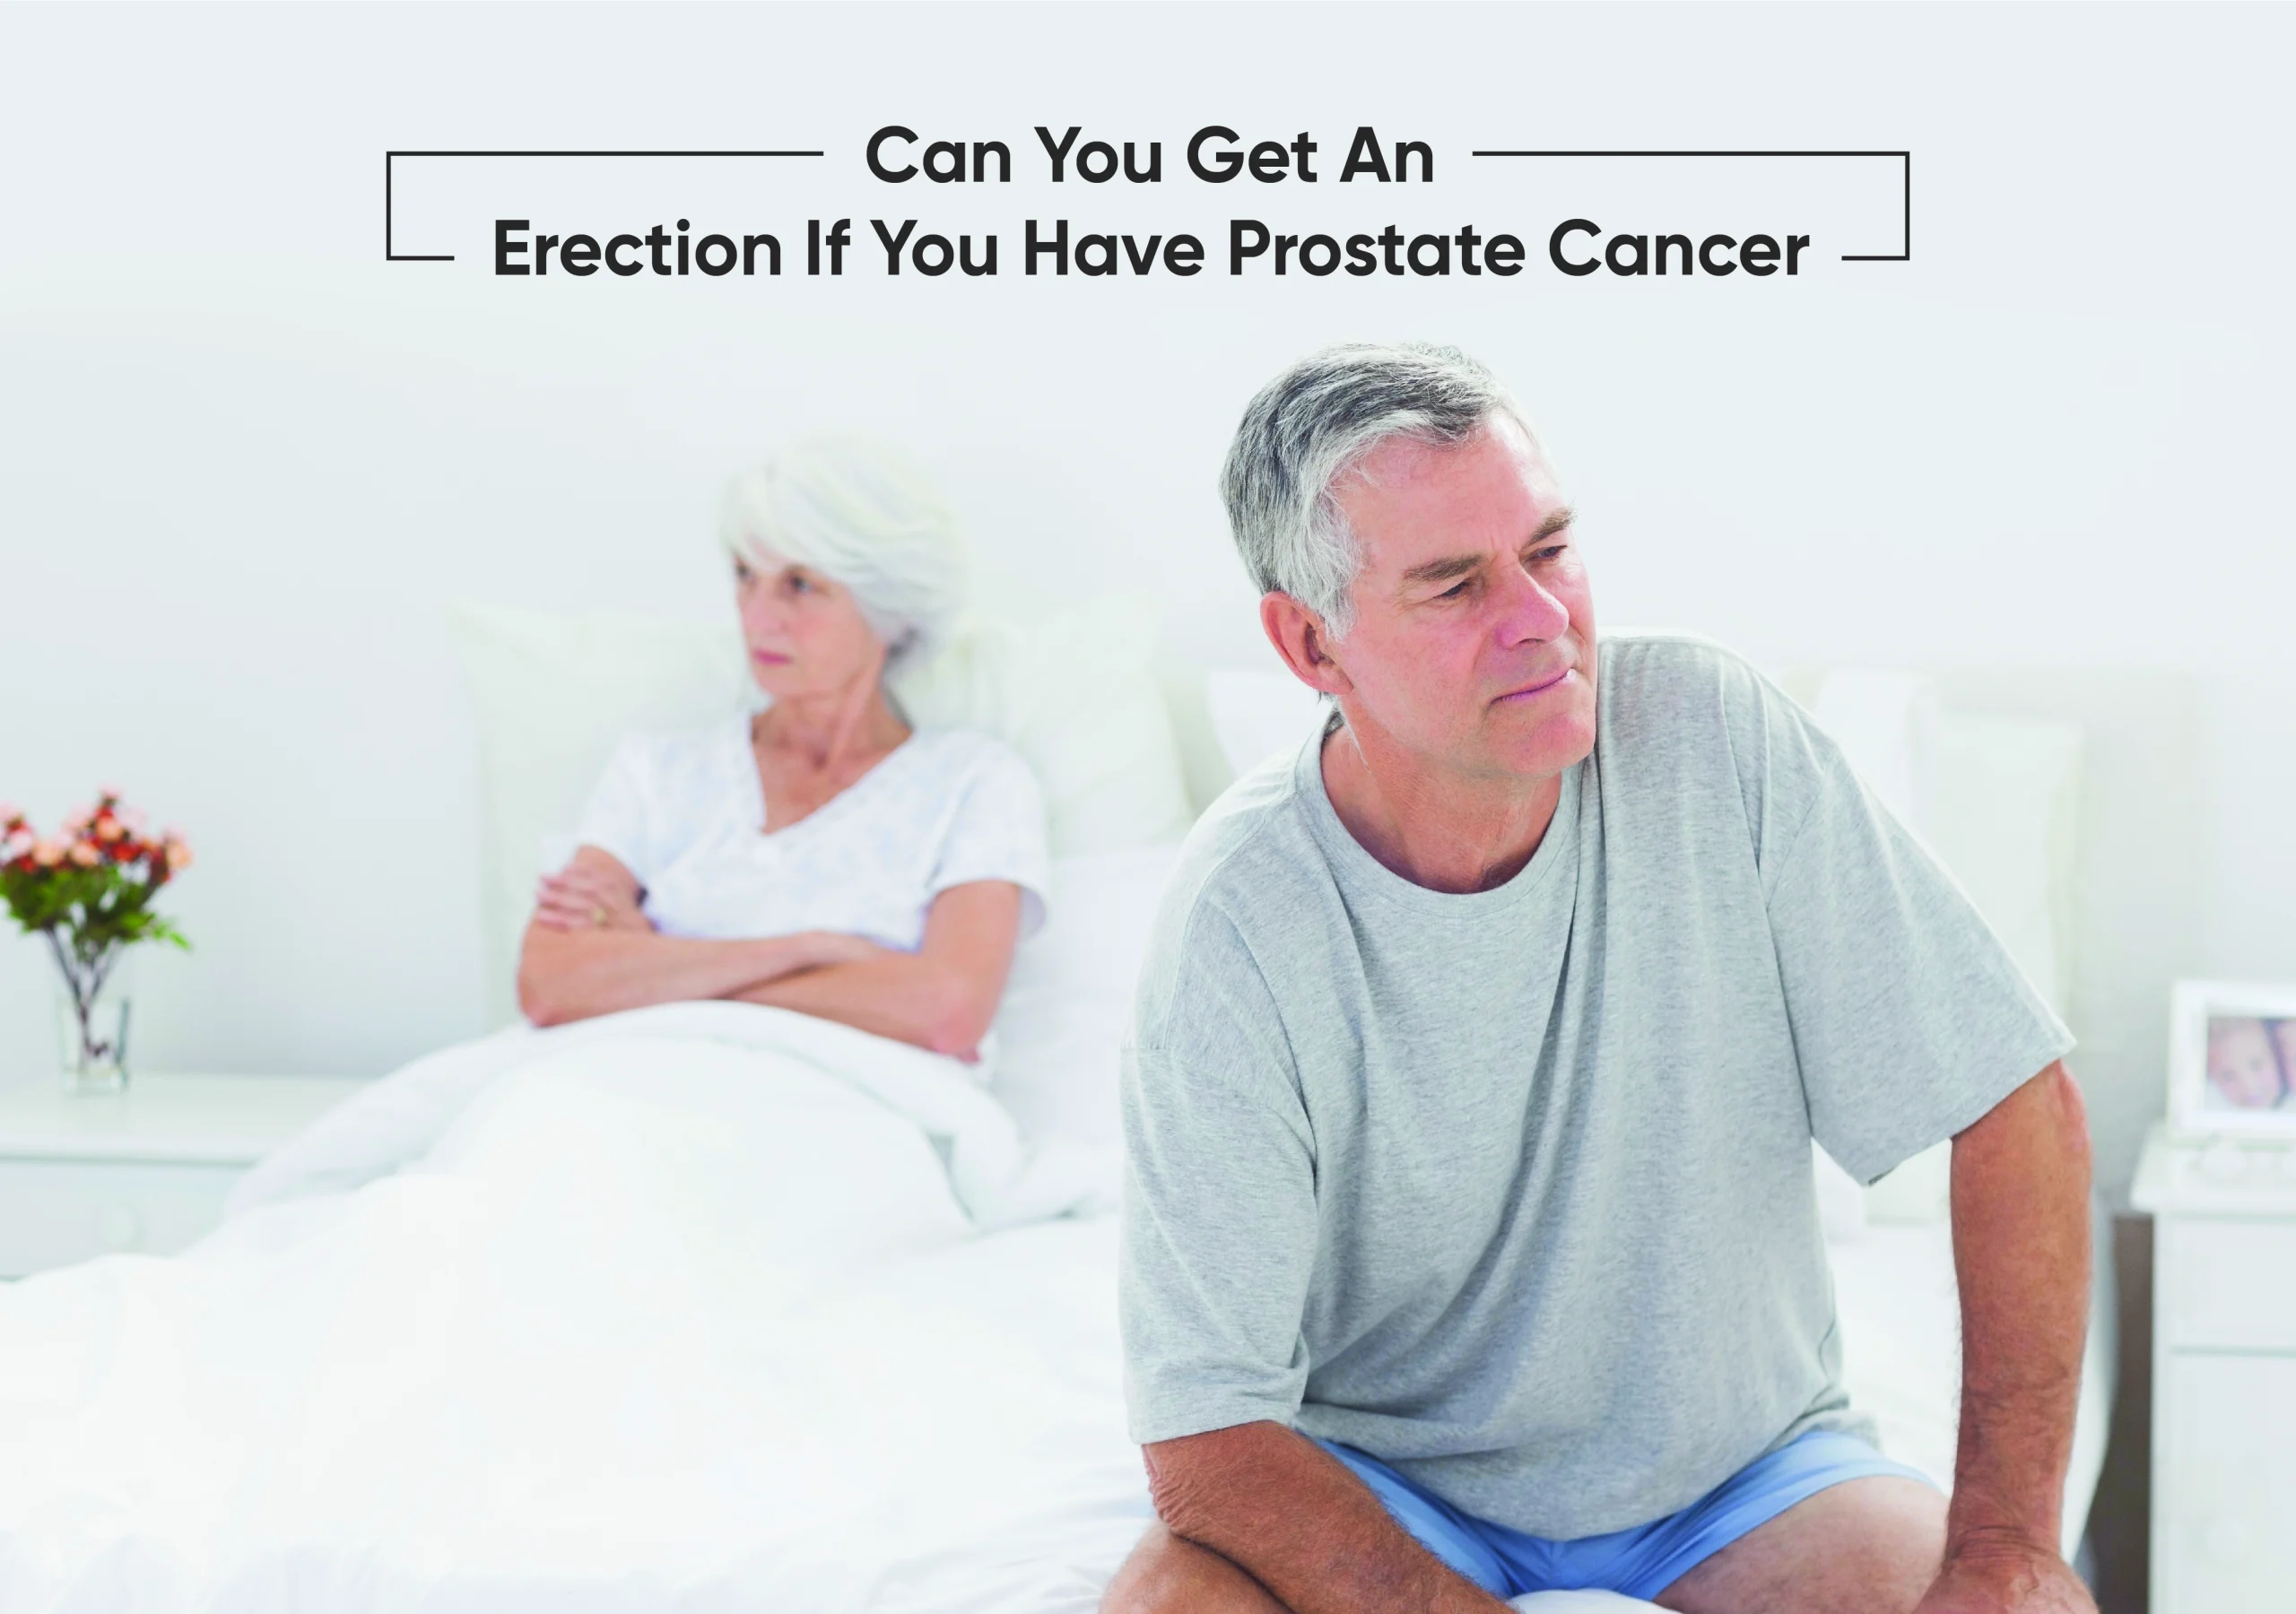 can-you-get-an-erection-if-you-have-prostate-cancer?